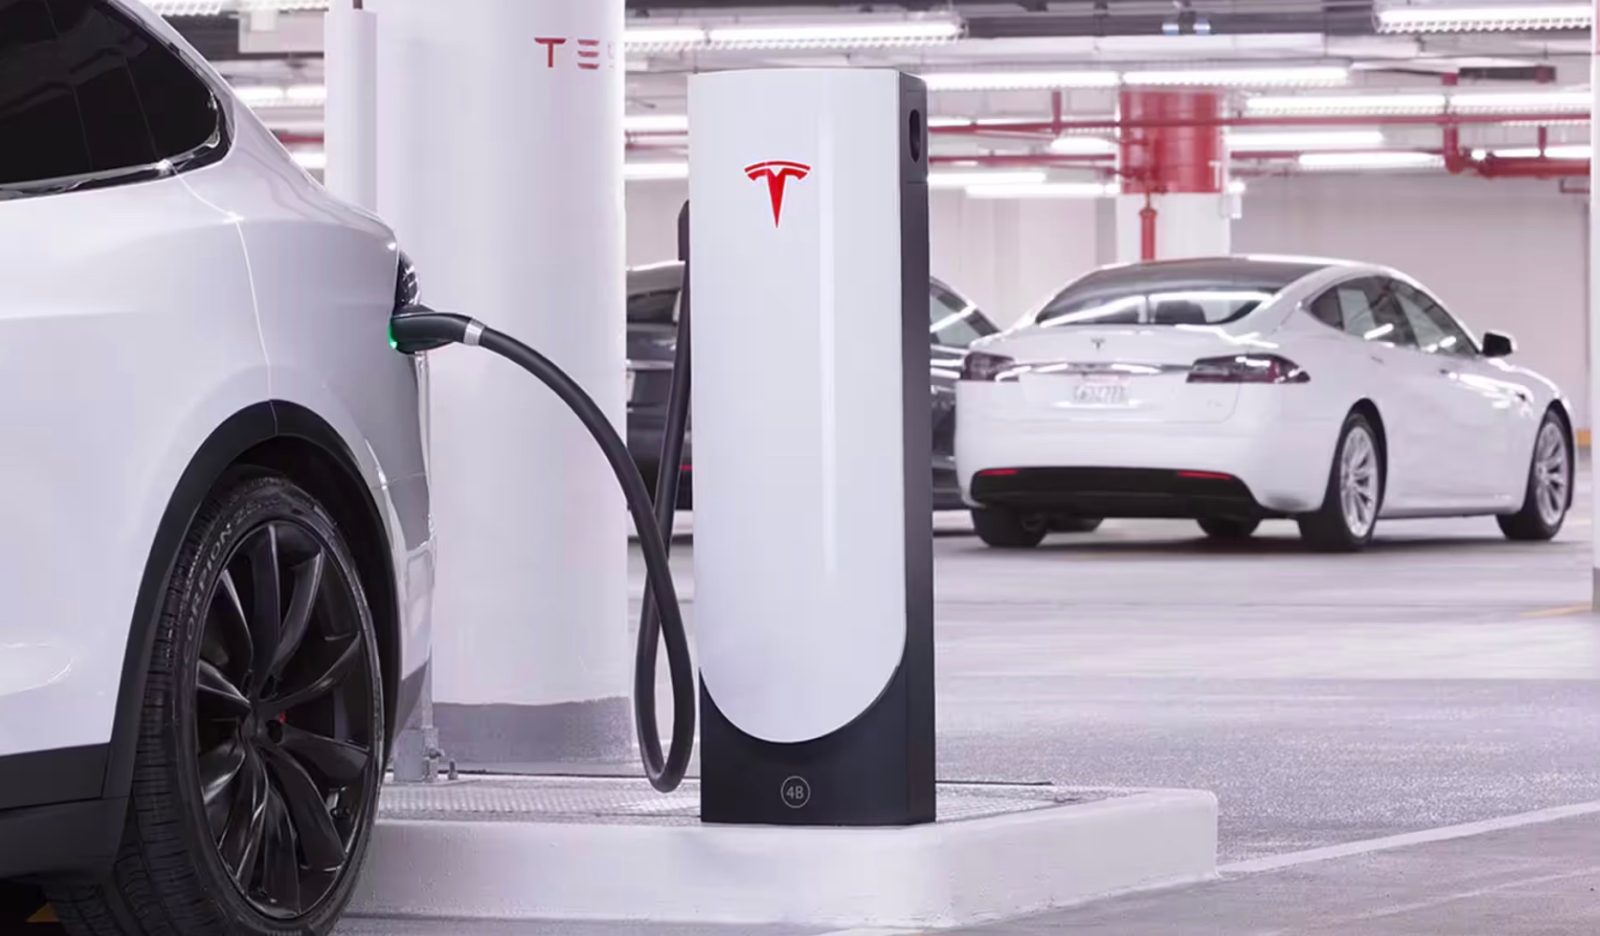 The Future of Tesla's Charging Network: Supercharging Pricing Options Explored